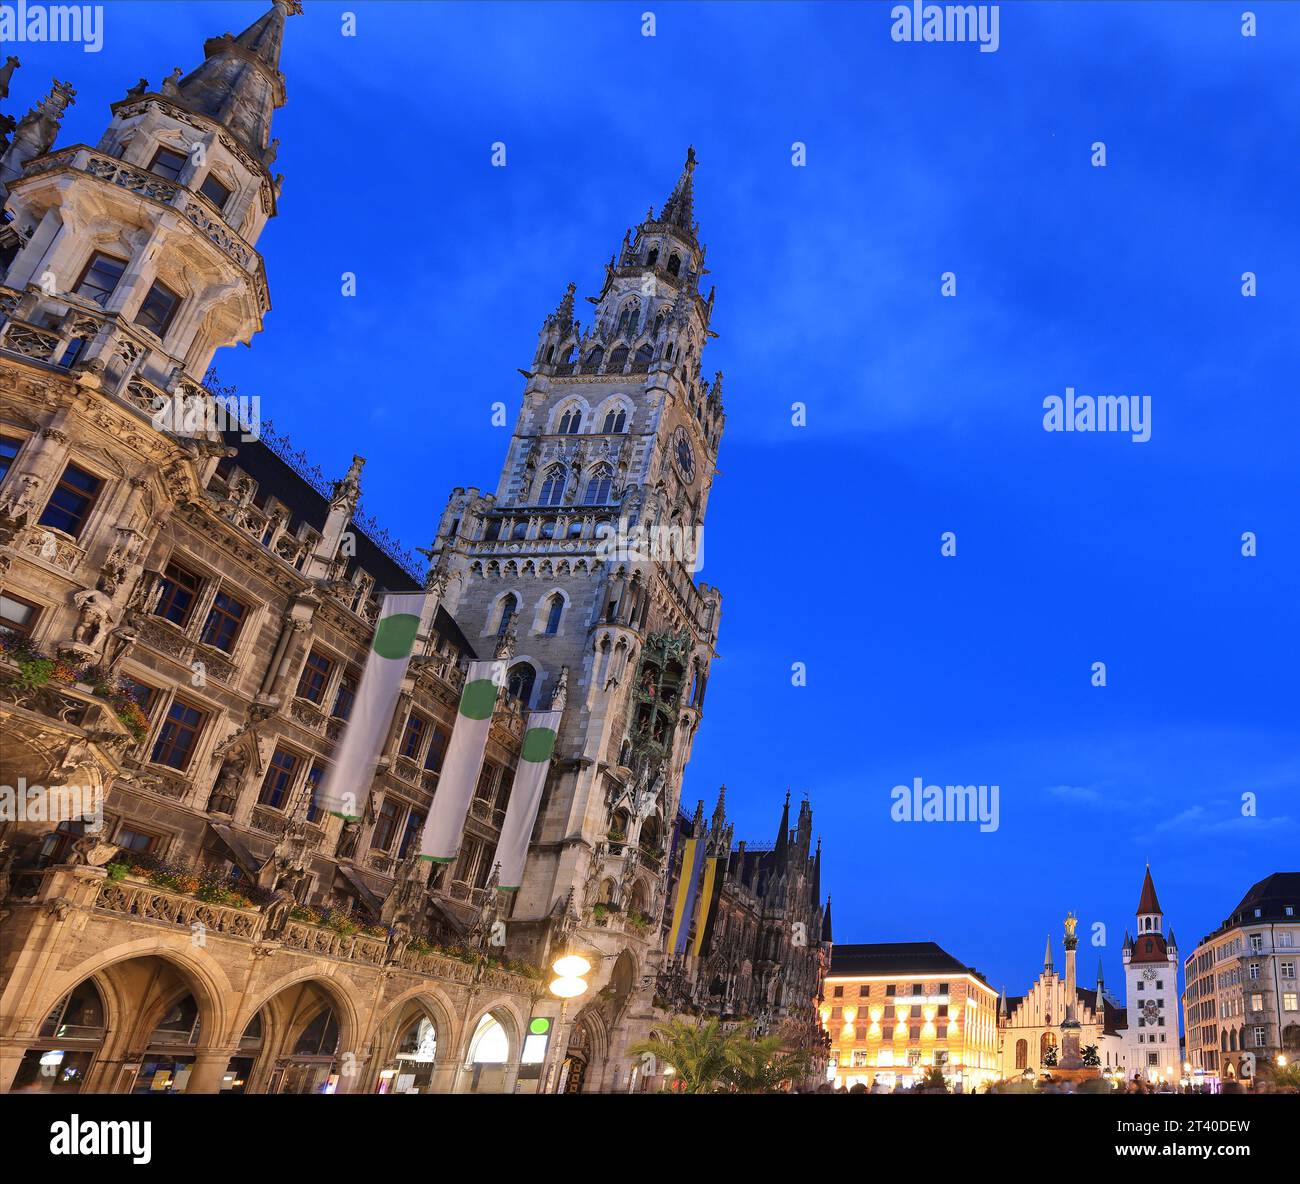 Mary's Square illuminated at dusk with the Old City Hall on the background in Munich, Germany Stock Photo